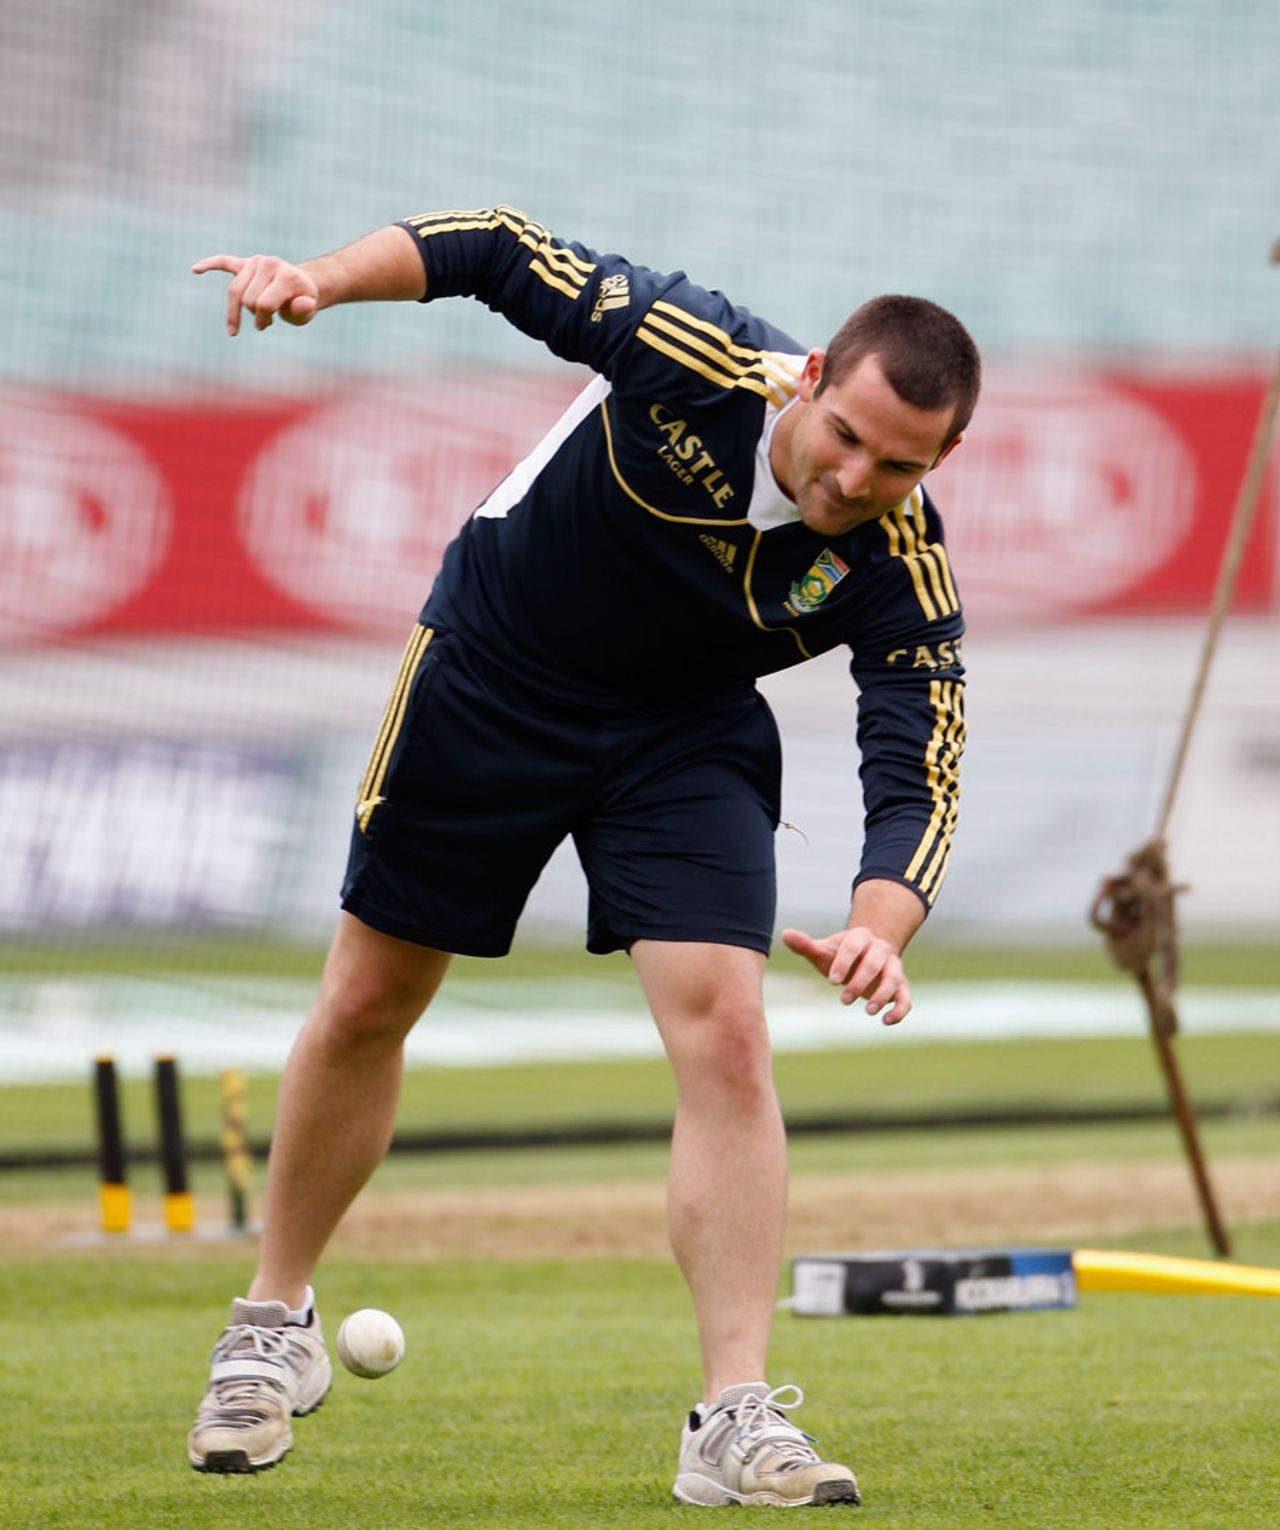 Dean Elgar collects the ball during South Africa practice, The Oval, August 30, 2012